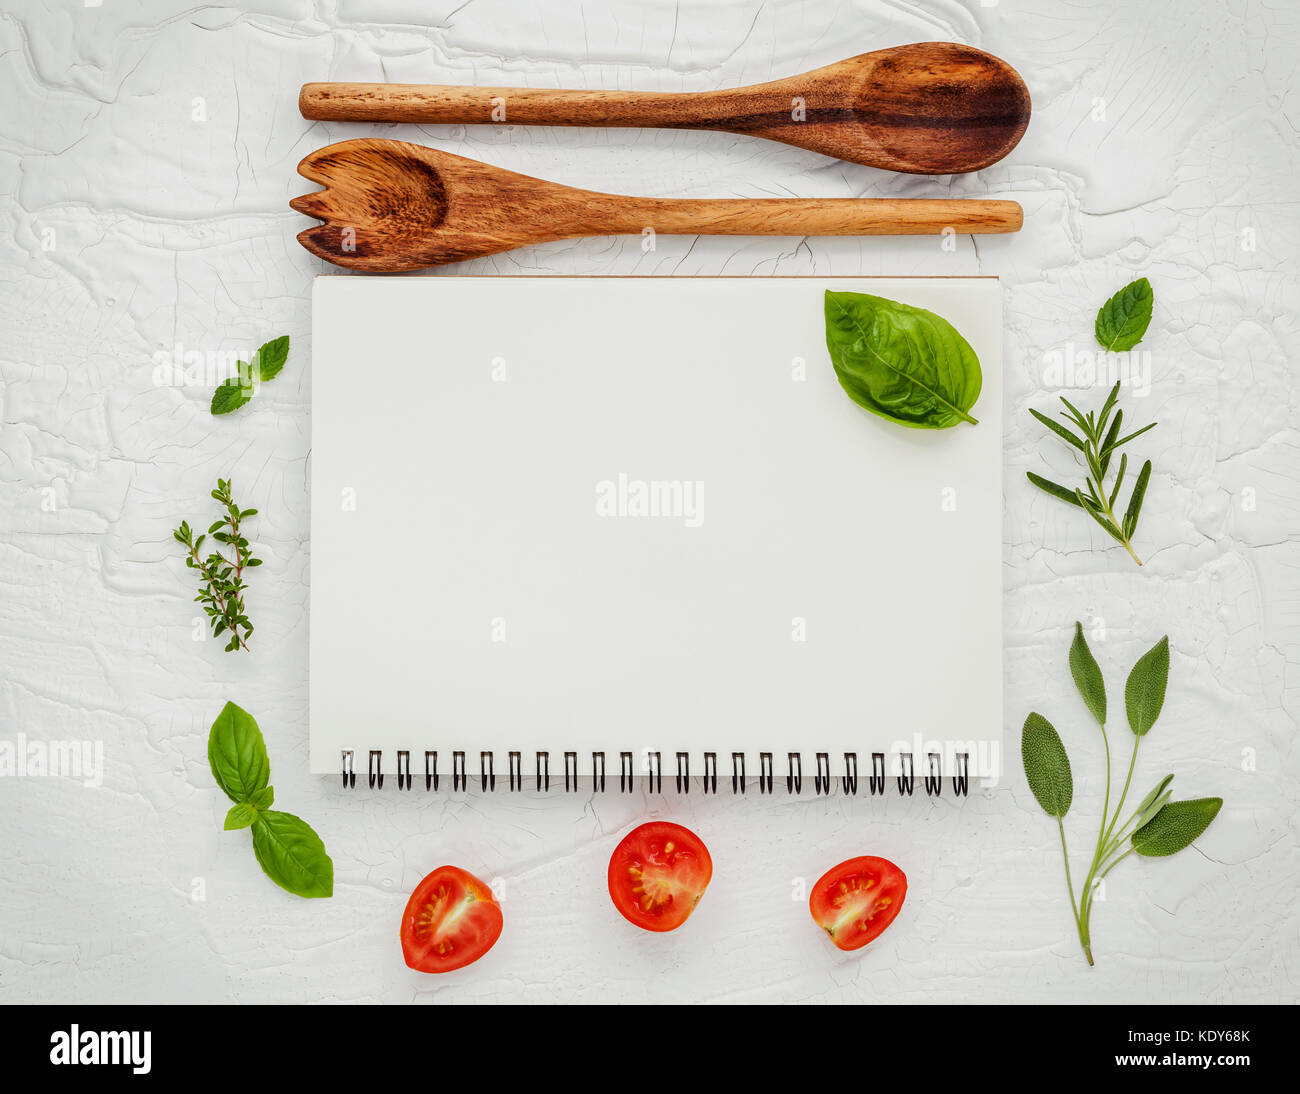 Foods background and Food menu design . Various herbs ingredients sweet  basil, sage ,lemon thyme ,rosemary, cherry tomatoes sliced setup with white  no Stock Photo - Alamy